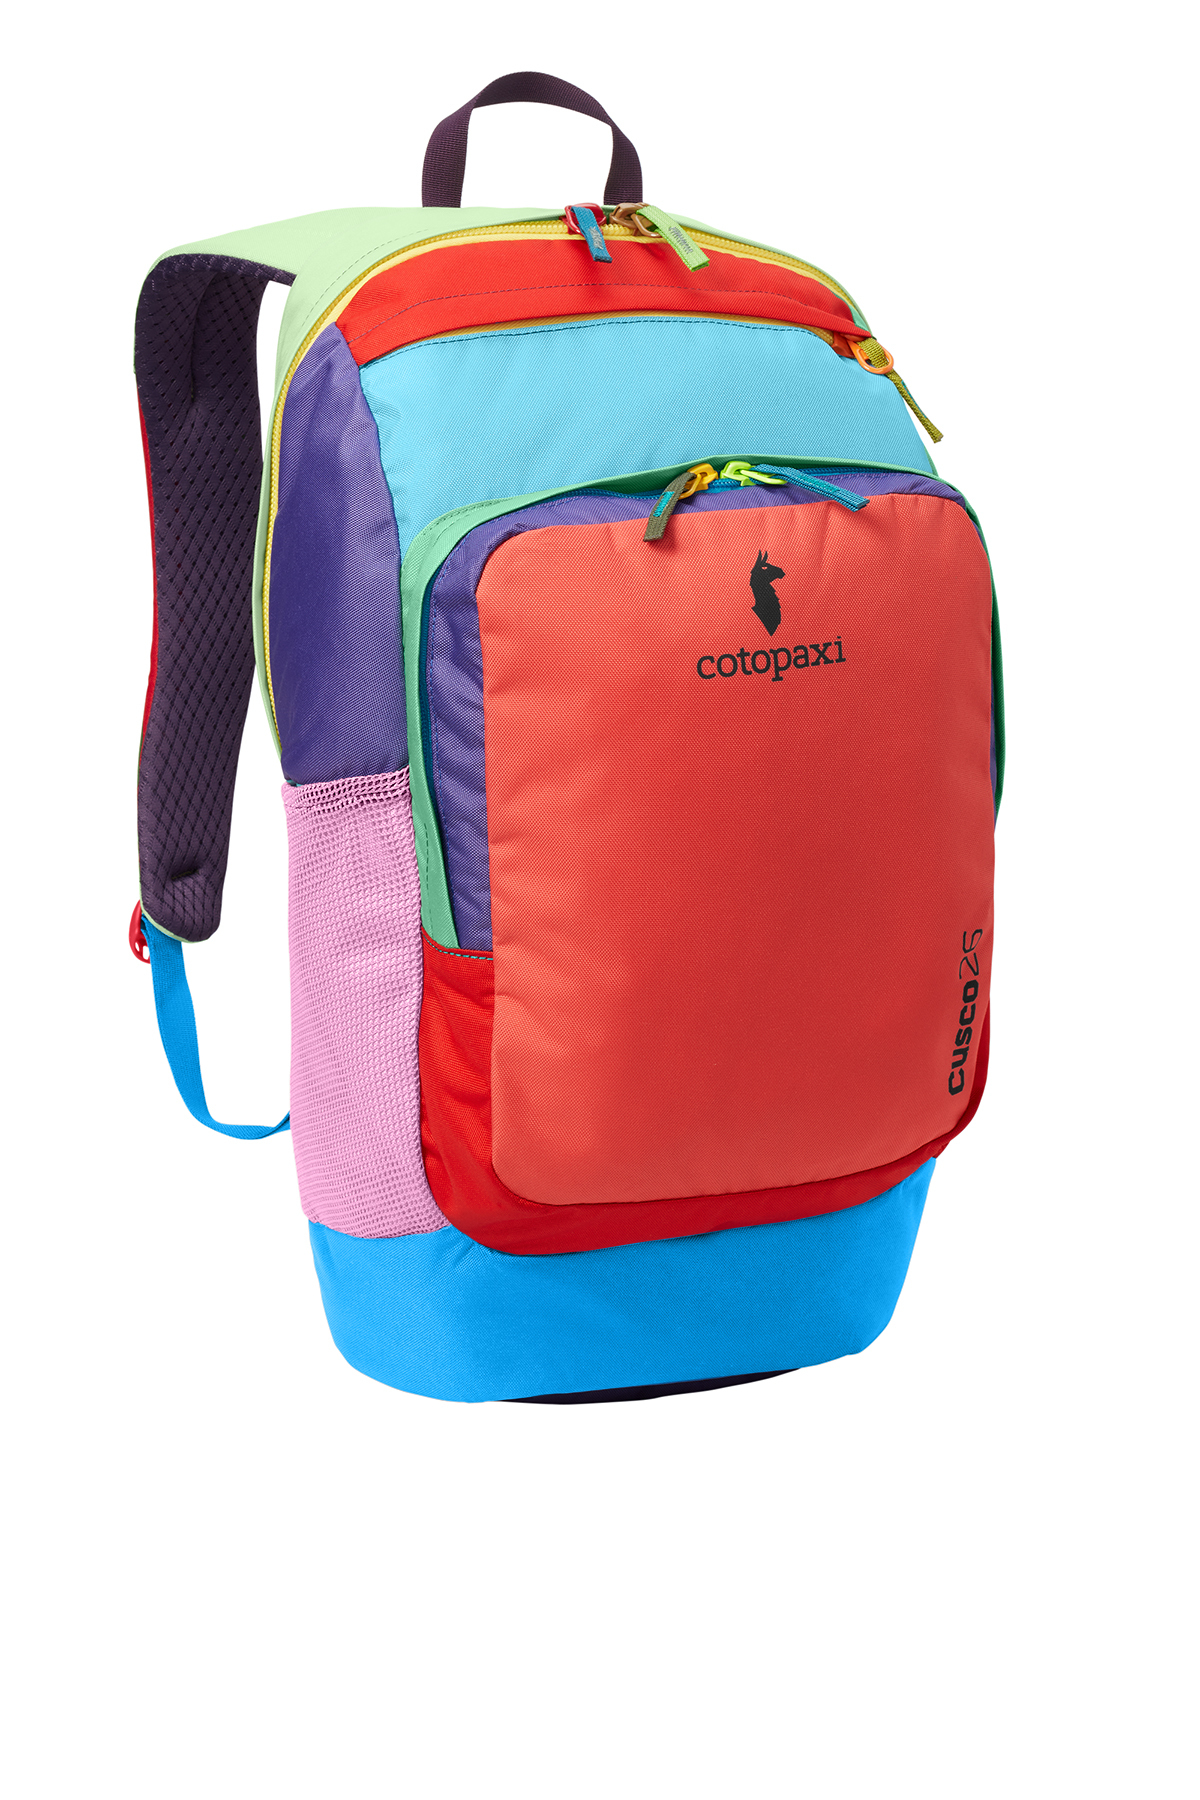 Cotopaxi Cusco 26L Backpack | Product | SanMar